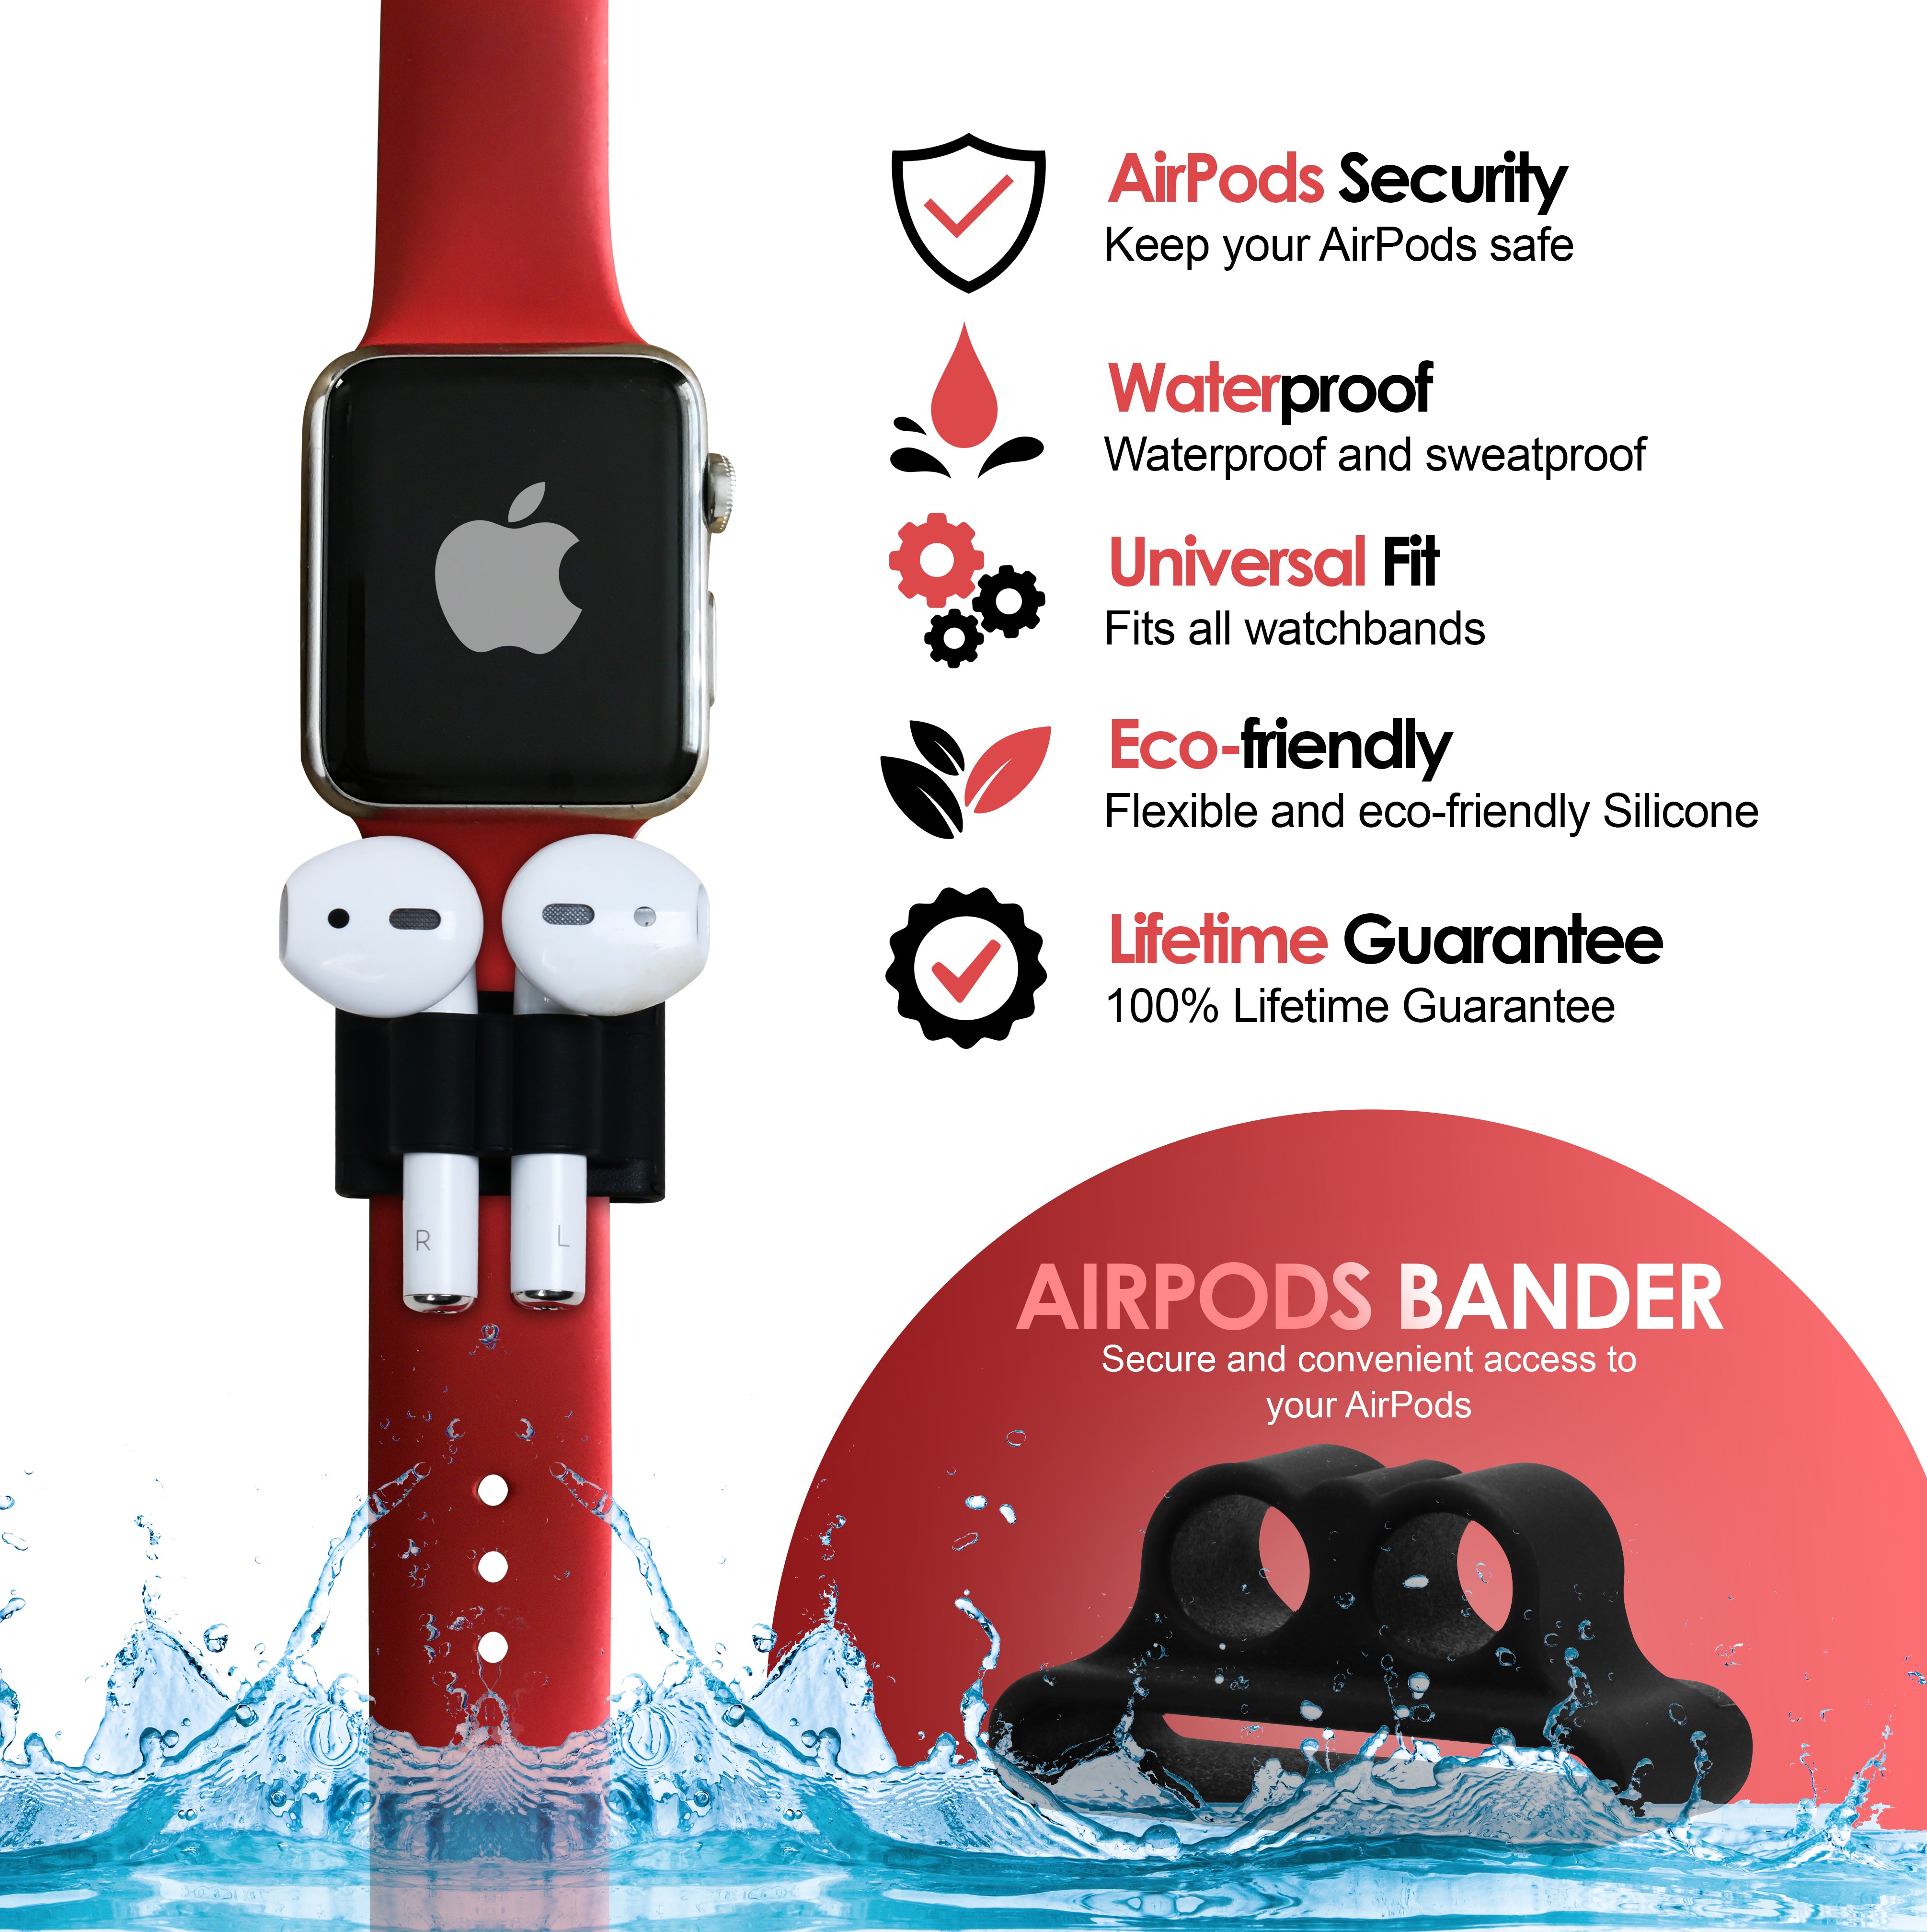 Ultimate Airpod Accessory Gift Pack - AirPod Skins, Case, Straps, Bander, Eartips and Hardshell Case